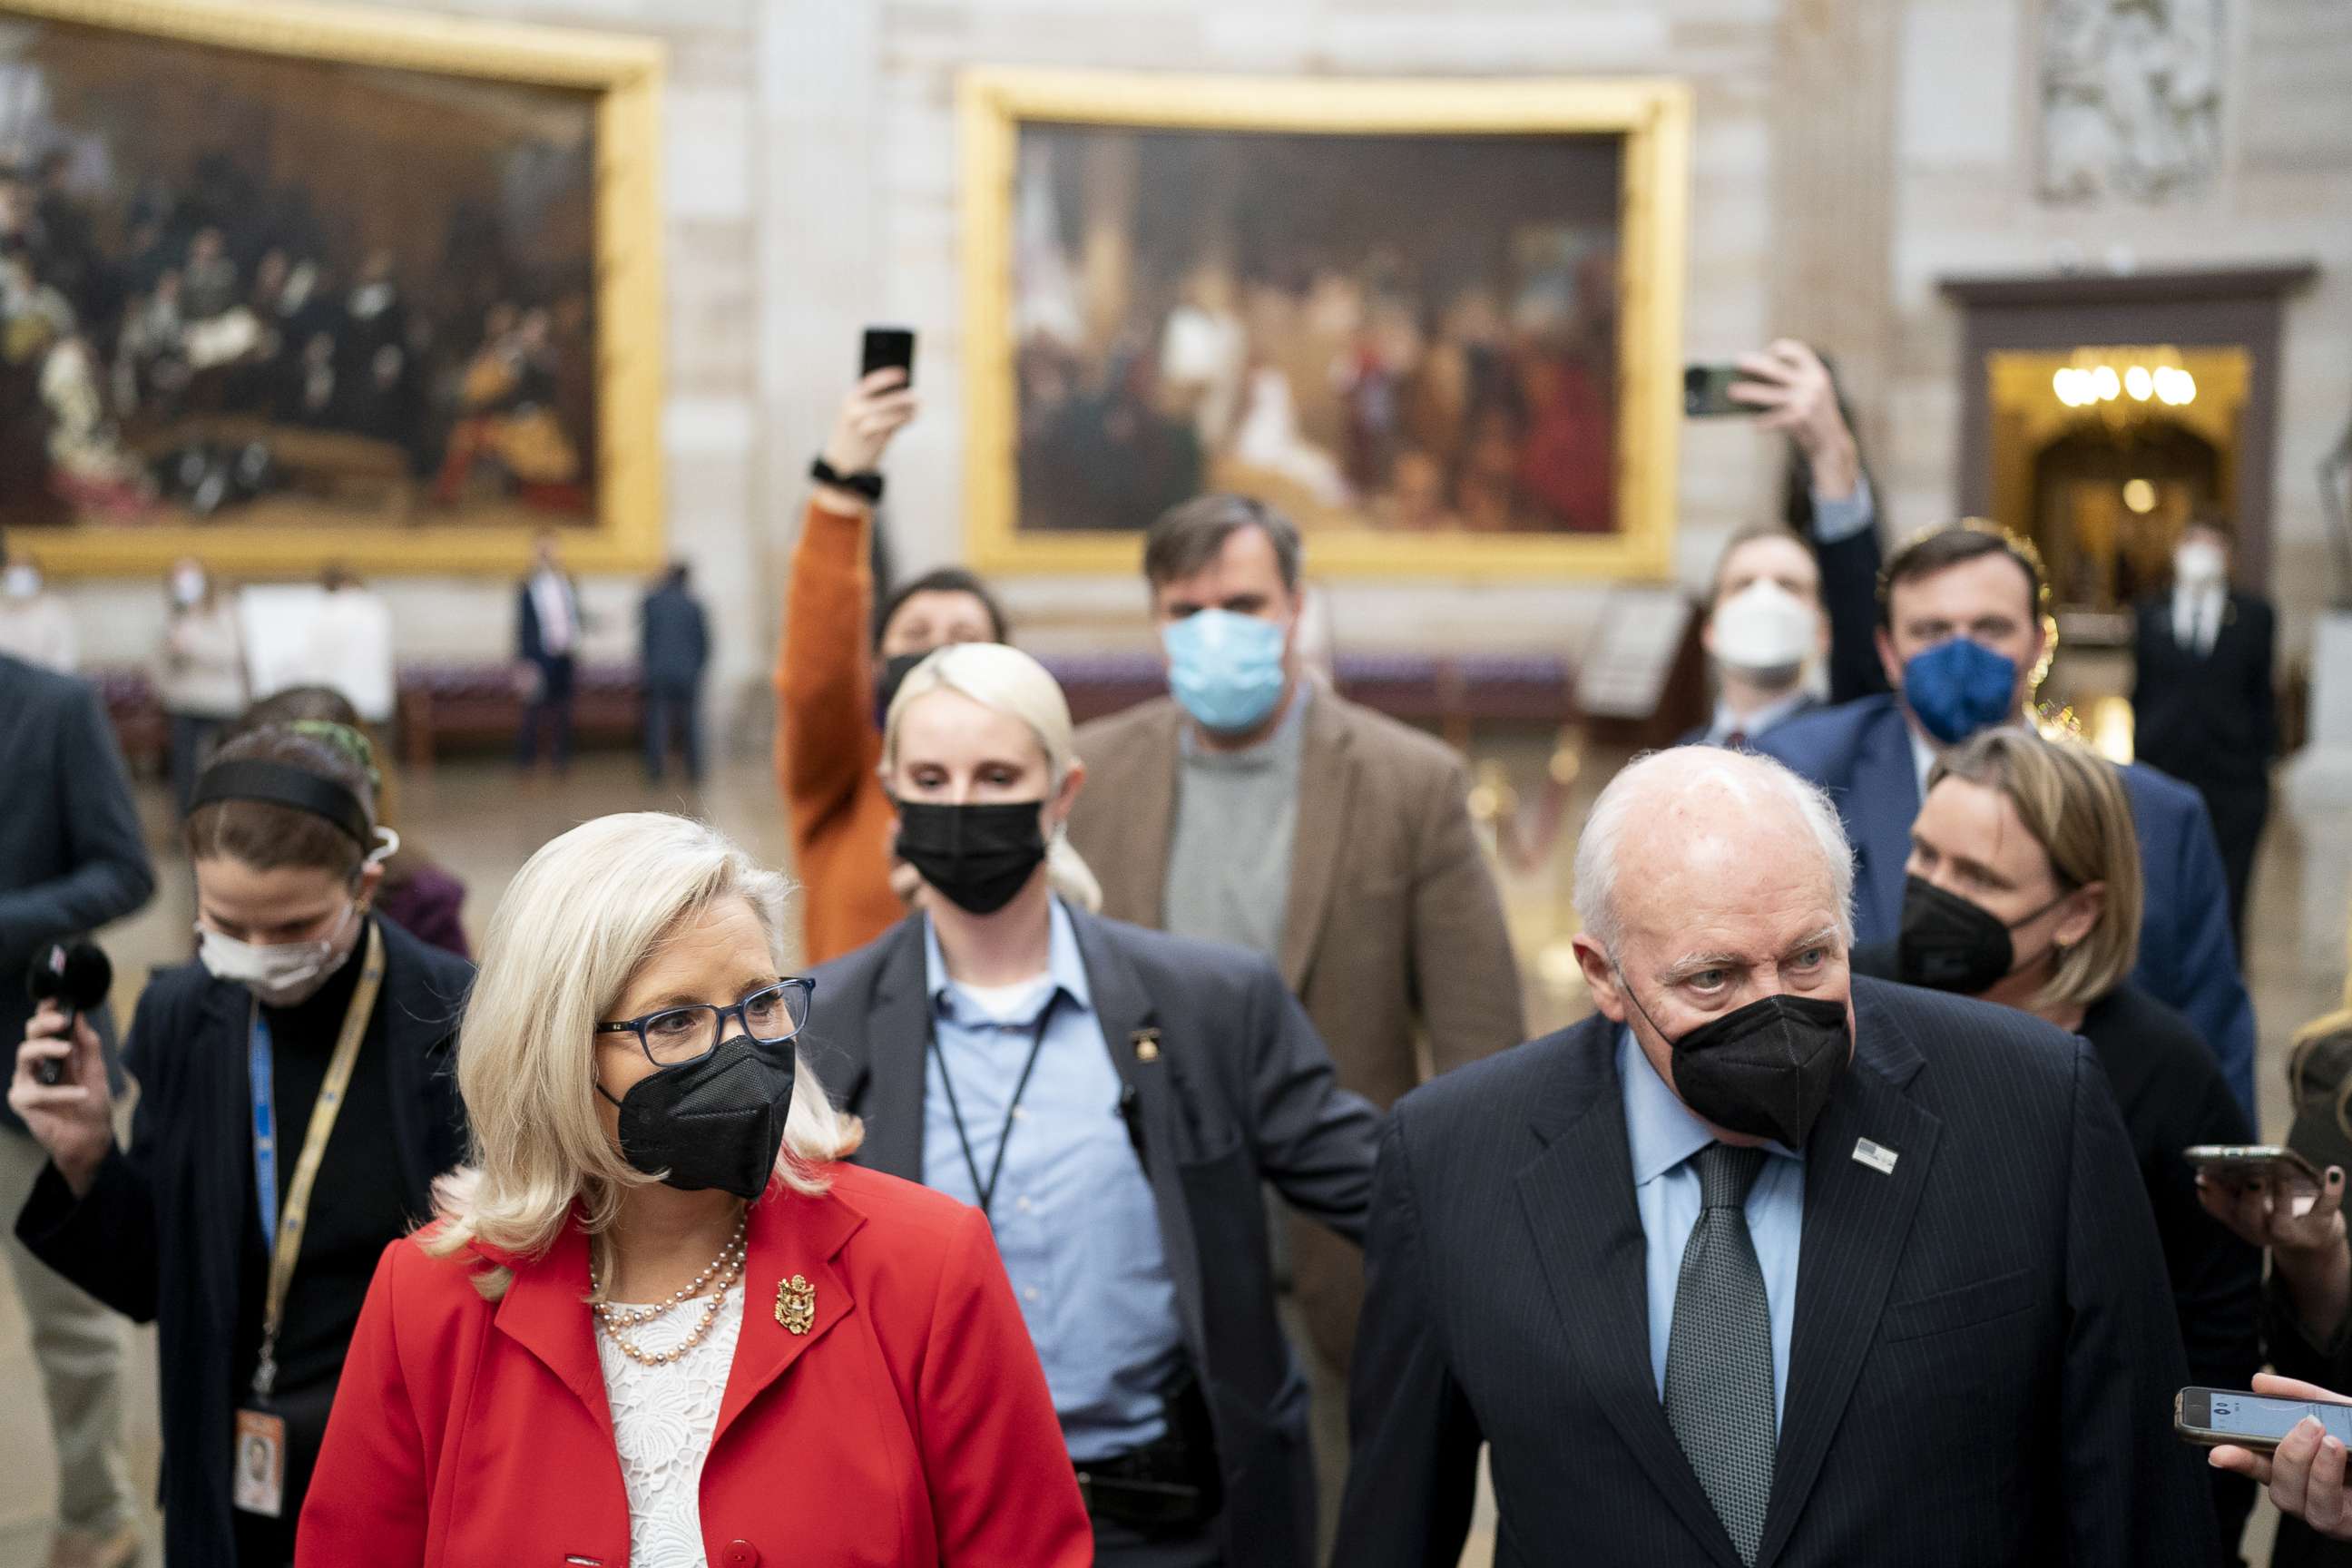 PHOTO: Rep. Liz Cheney, left, and former Vice President Dick Cheney walk through the Rotunda on the first anniversary of the deadly insurrection at the U.S. Capitol in Washington, D.C.,Jan. 6, 2022.